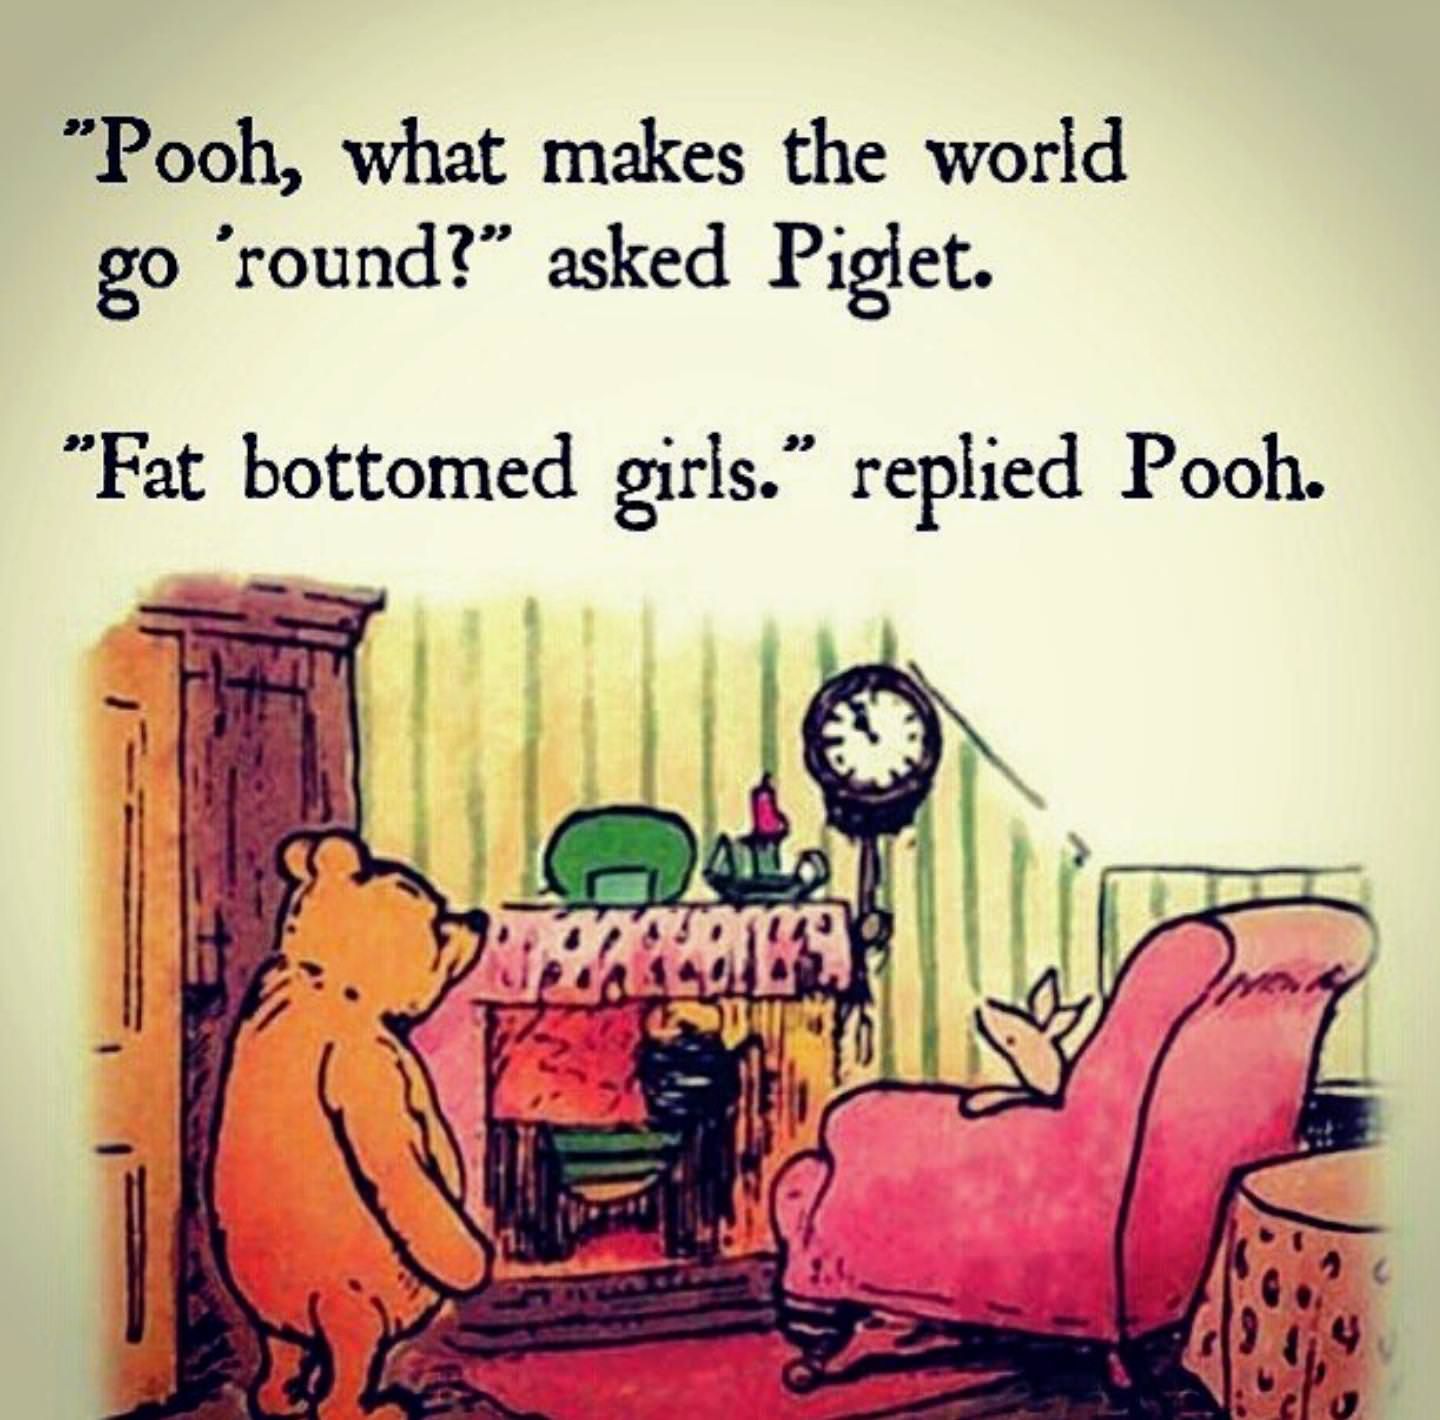 Pooh was on to something...